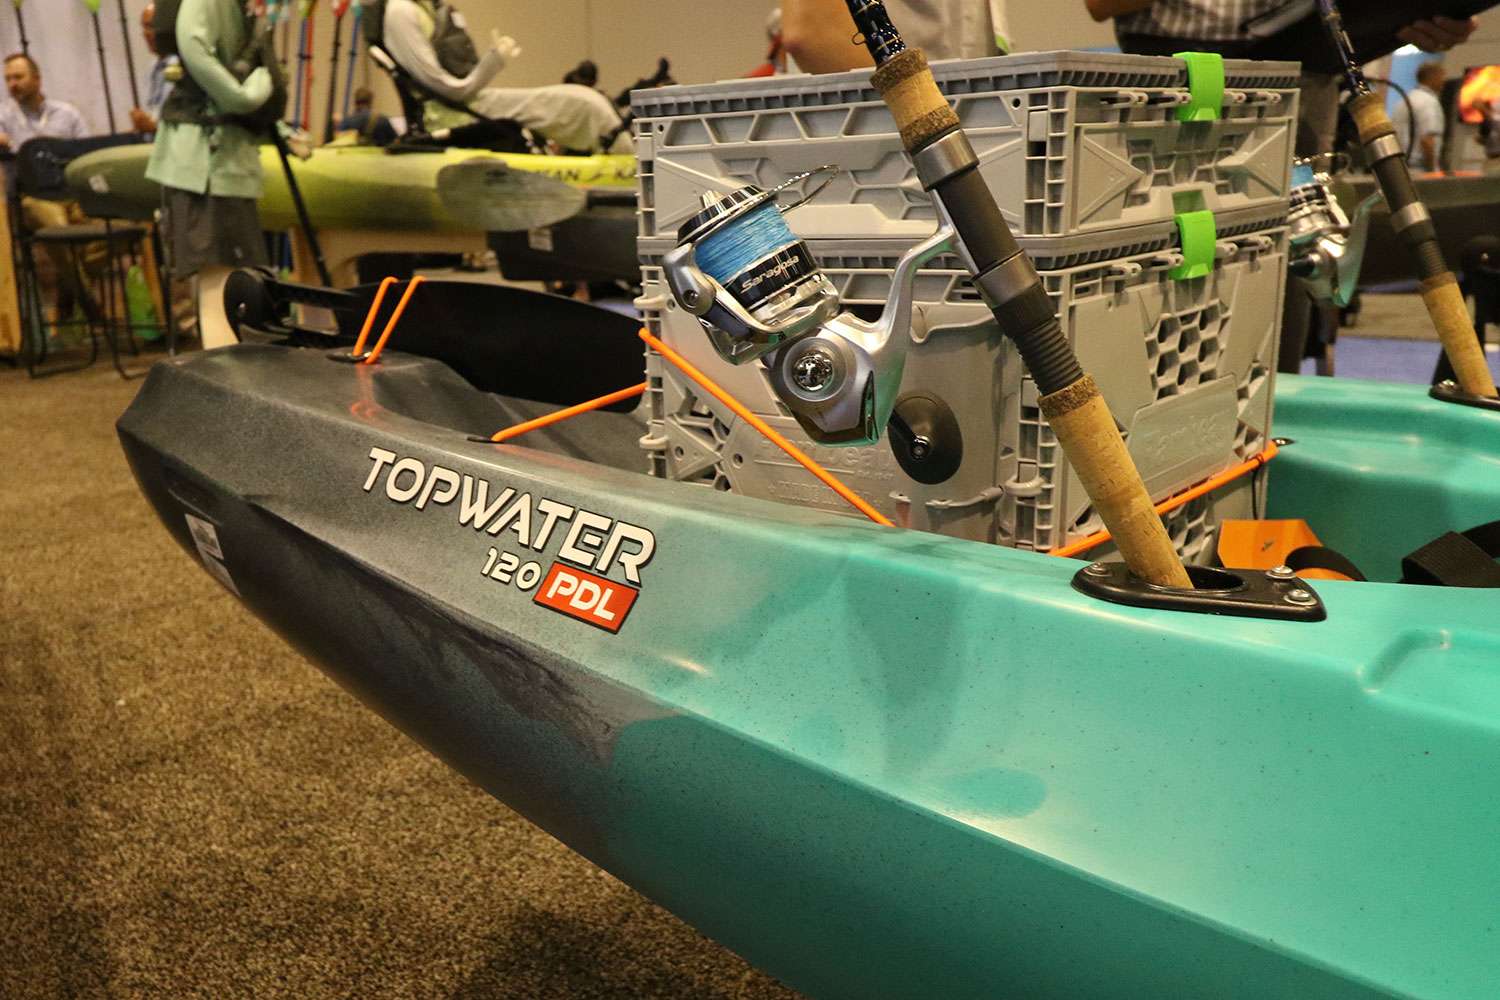 The 120 has lots of rod holders and storage space for tackle boxes and whatever else you might need.